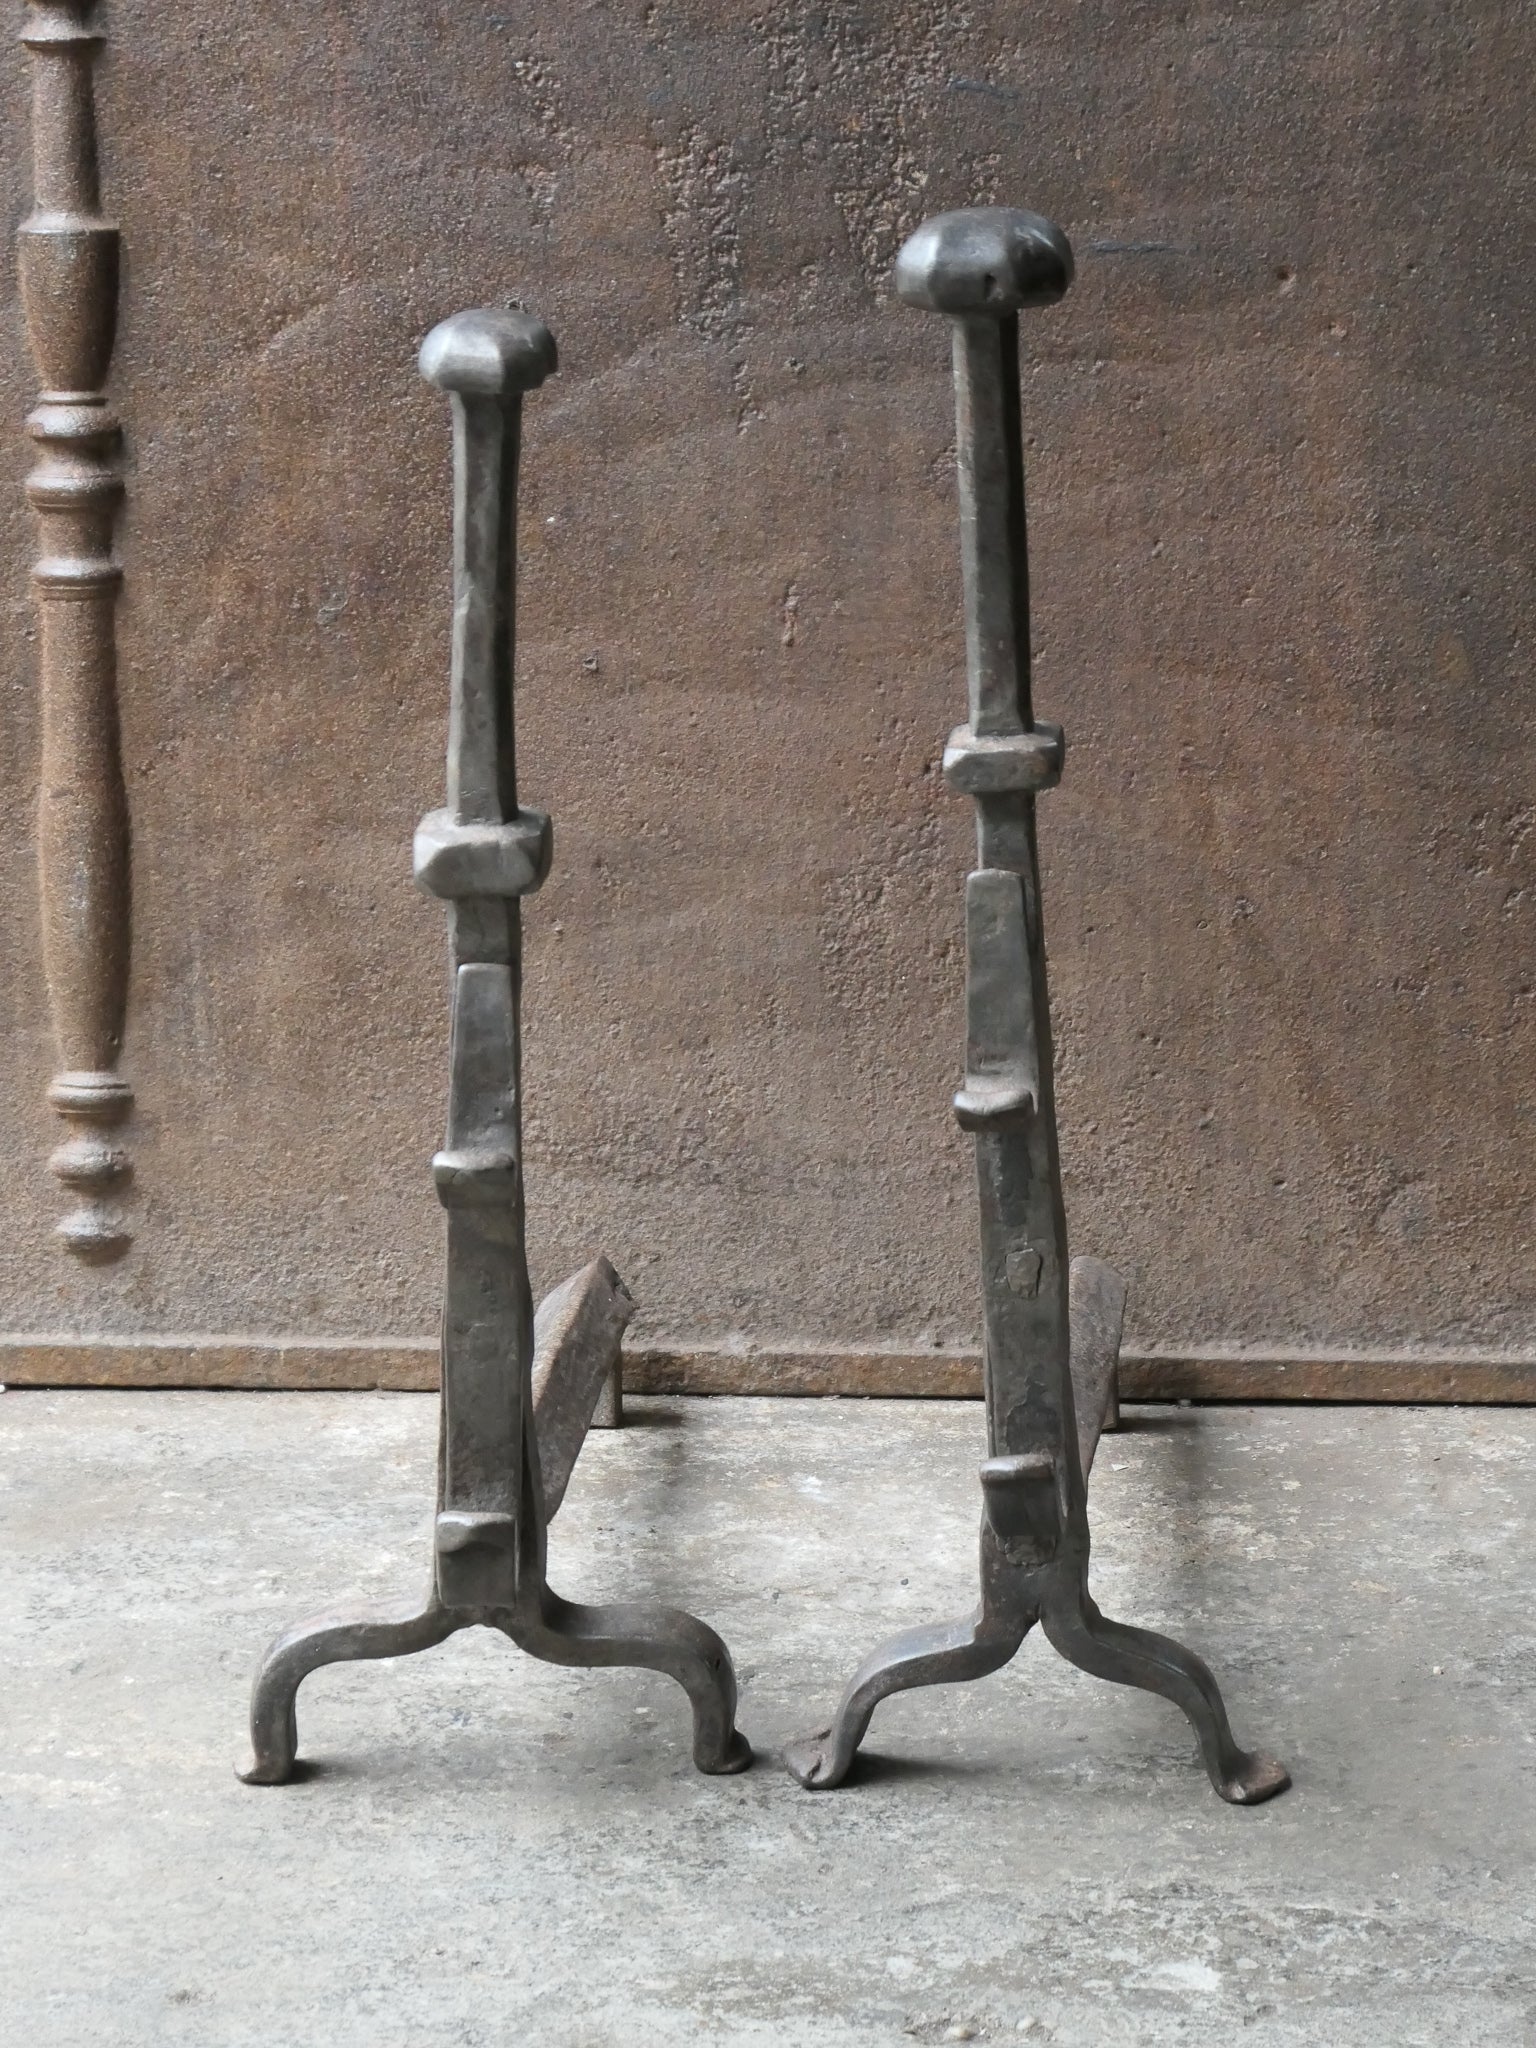 Beautiful 17th - 18th century French andirons - fire dogs made of wrought iron. These French andirons are called 'landiers' in France. This dates from the times the andirons were the main cooking equipment in the house. They had spit hooks to grill